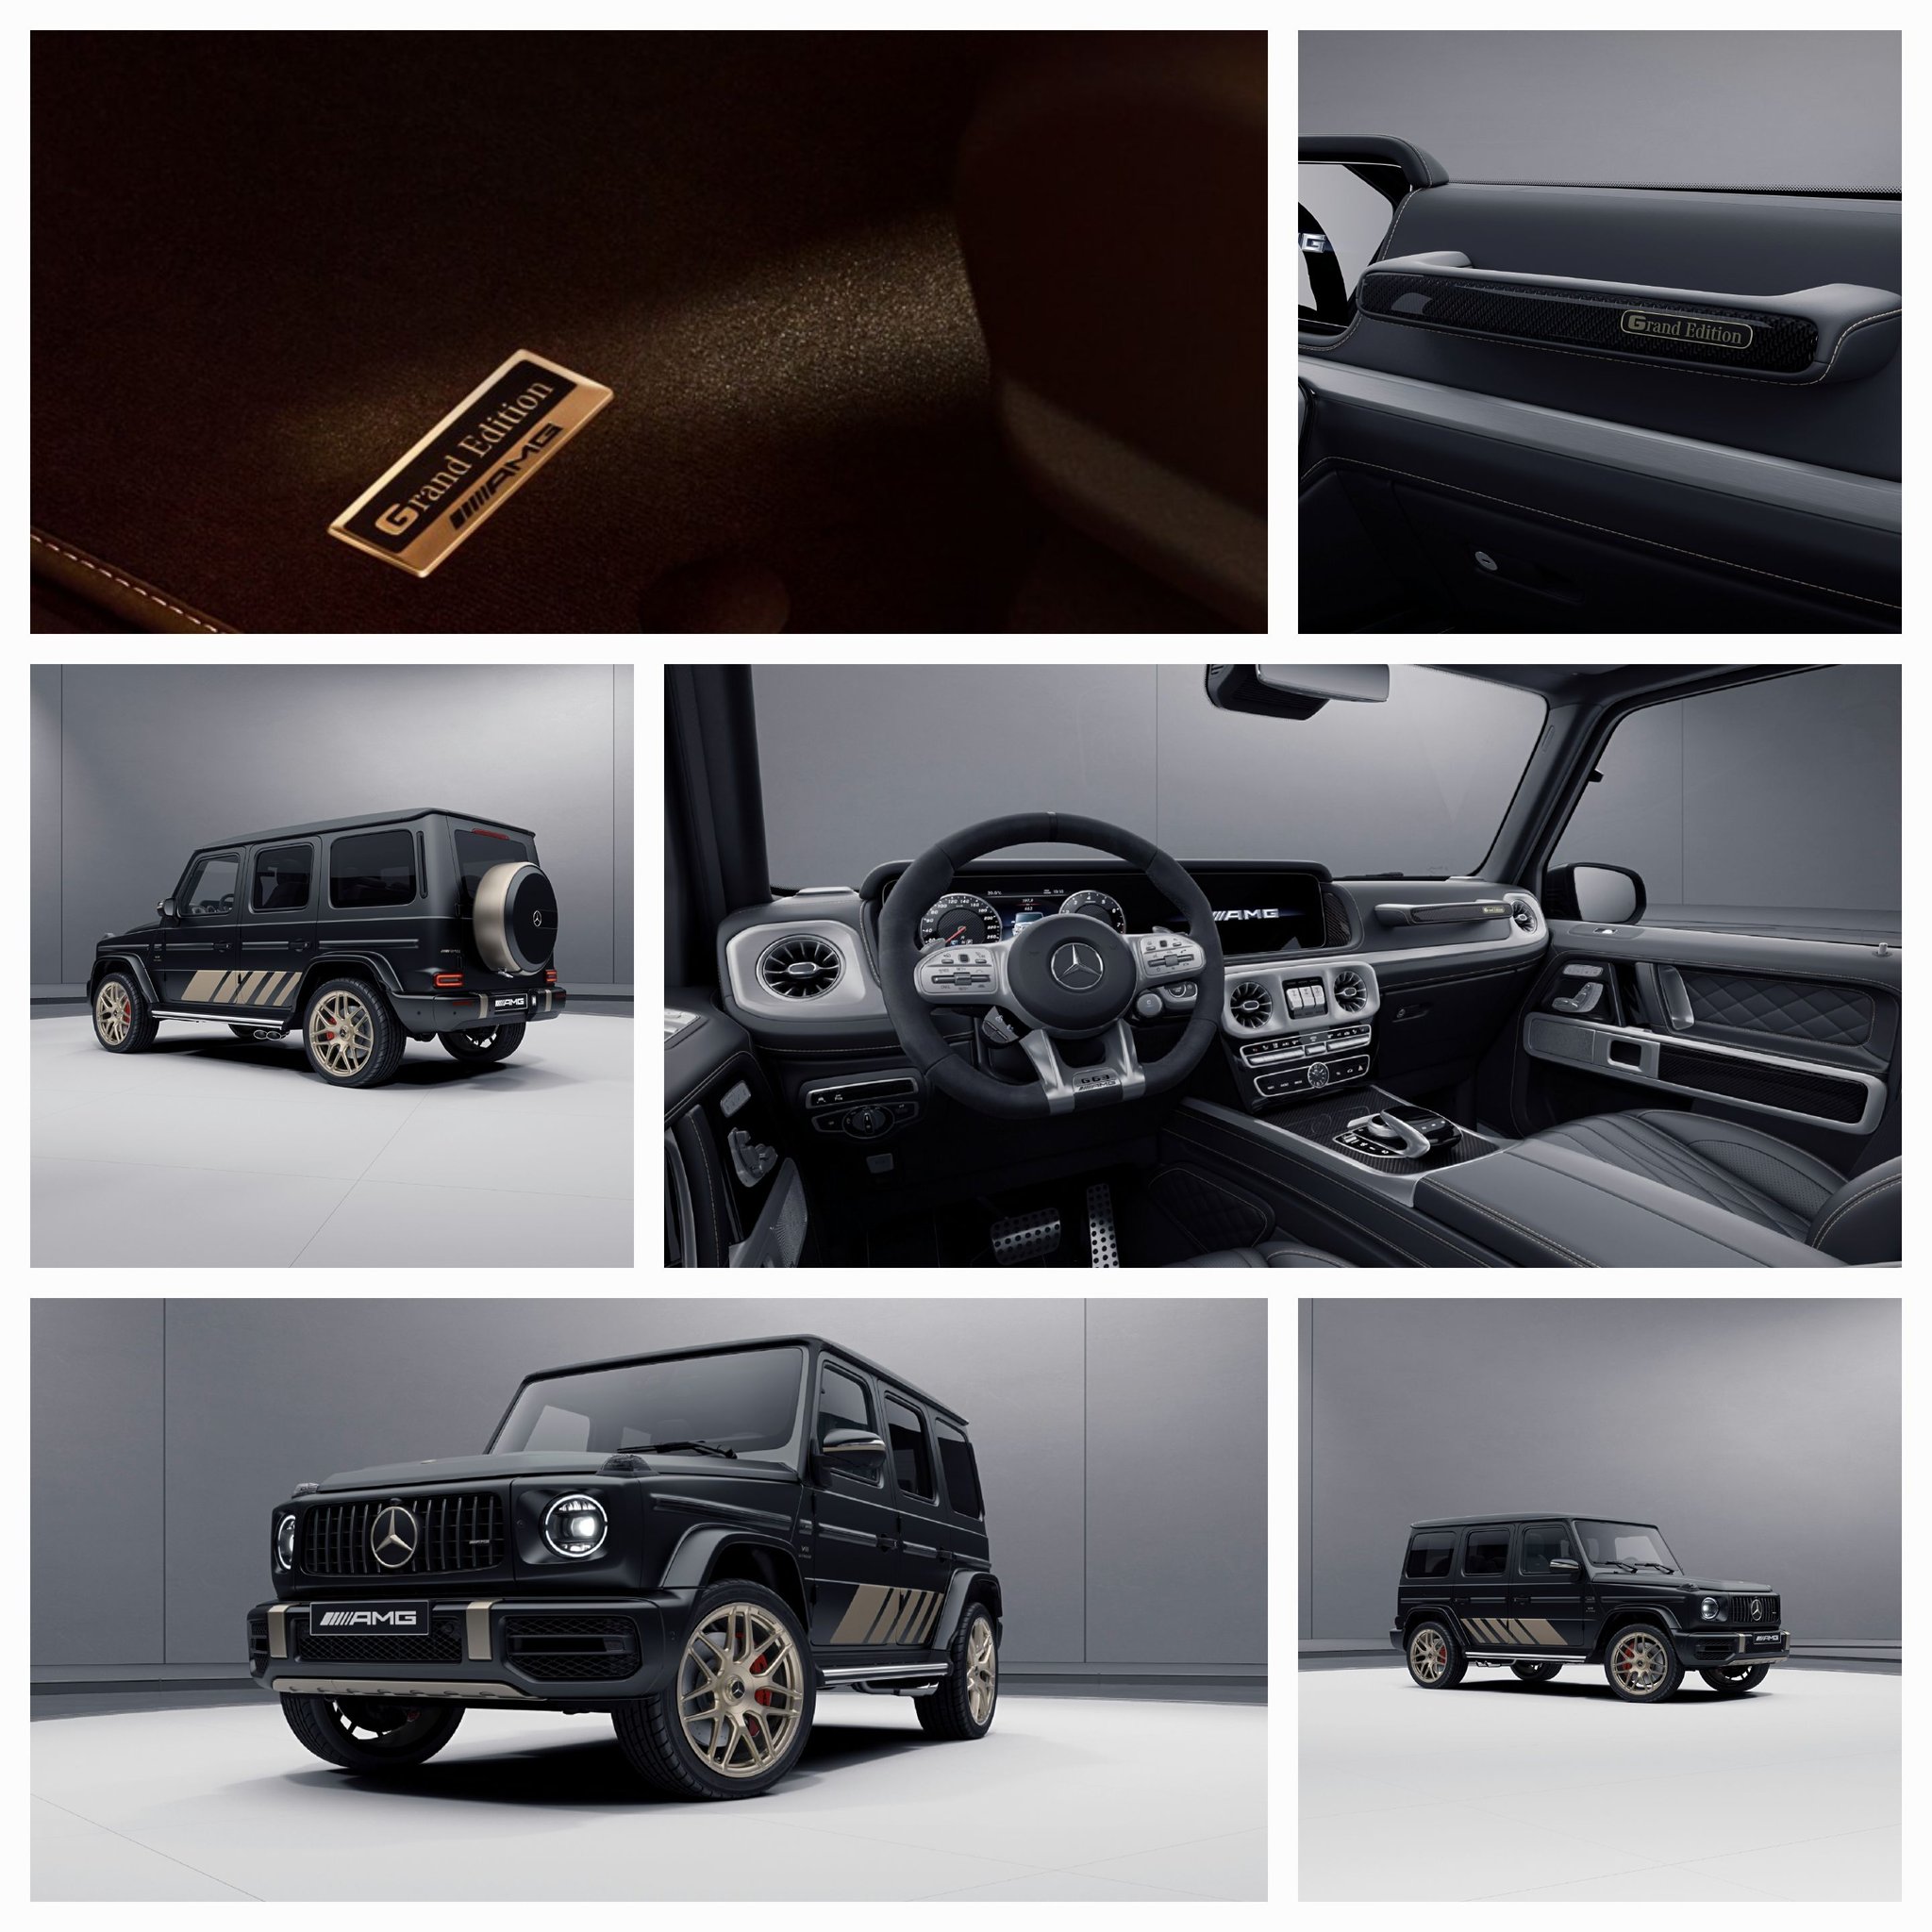 Amit khare on X: limited 25 units of these exclusive @mercedesbenzind #AMG  #G63 SUV, for its existing Mercedes-Benz Top-End Vehicle customers only.  The deliveries of these exclusive 'Grand Edition' will commence from